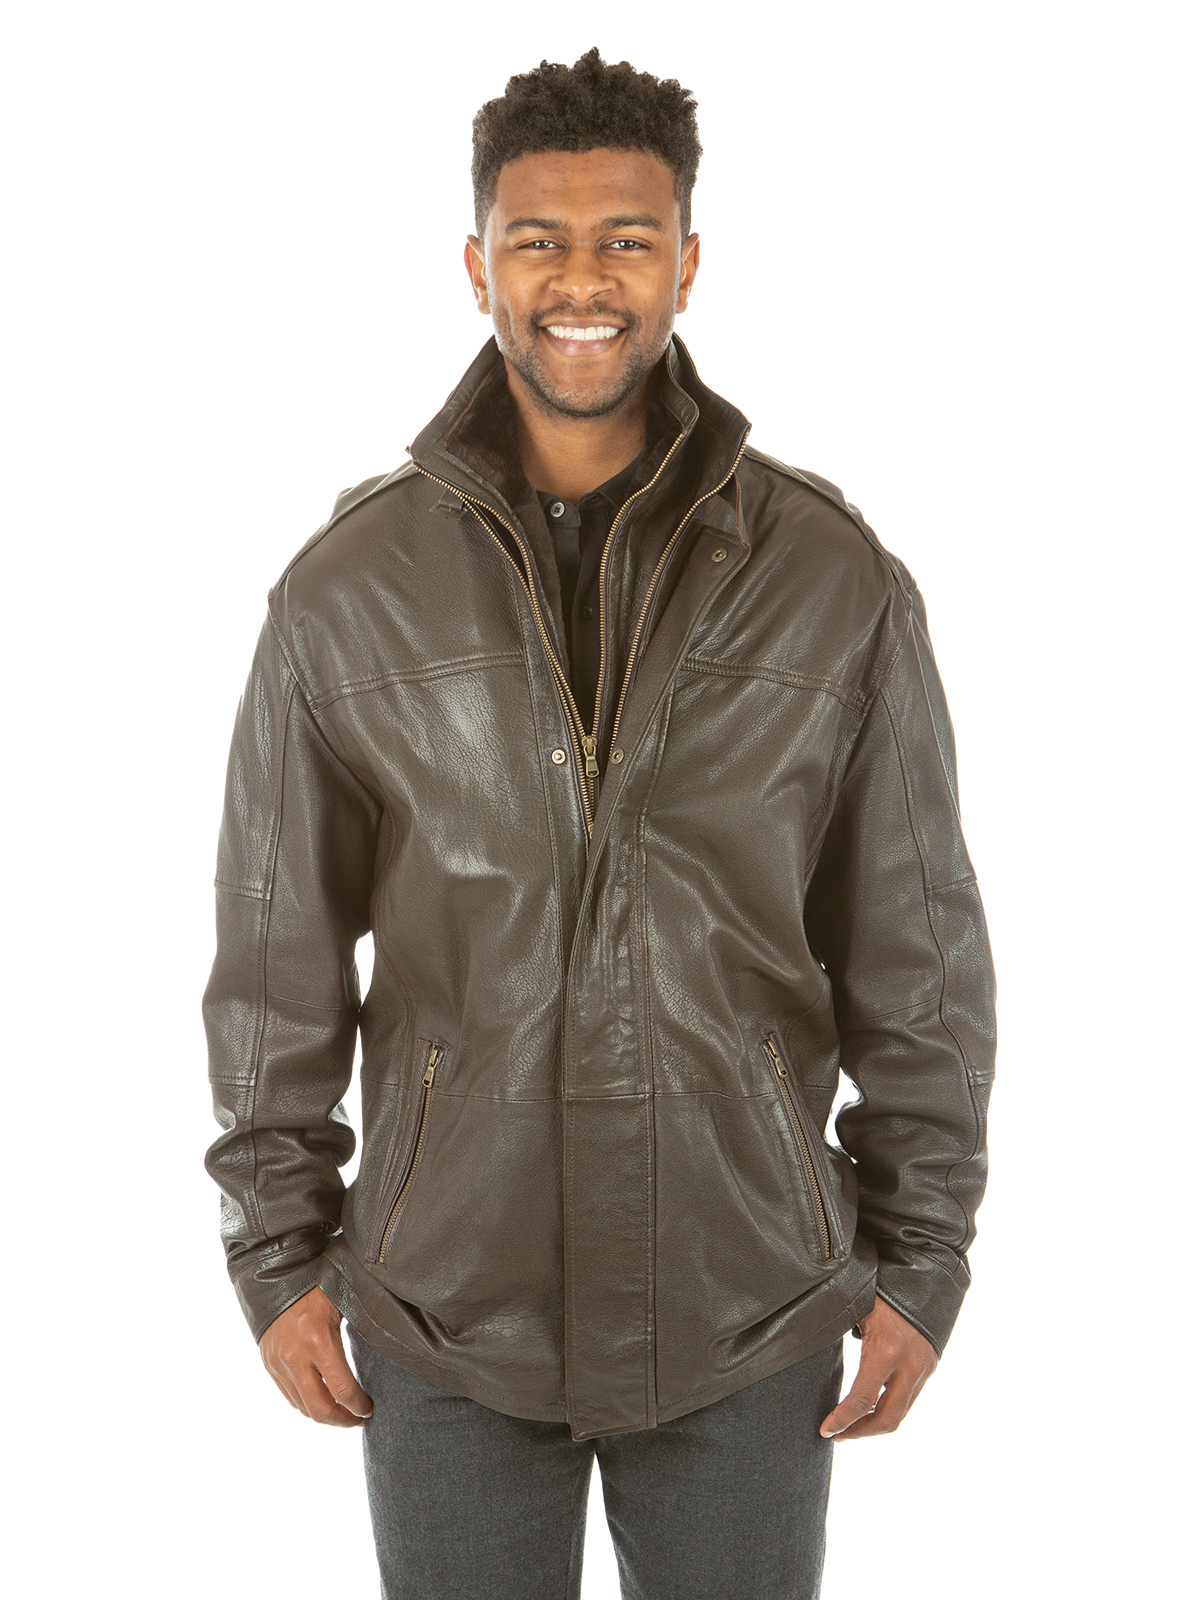 Man's Brown Leather Zipper Jacket with Detachable Shearling Lamb Collar